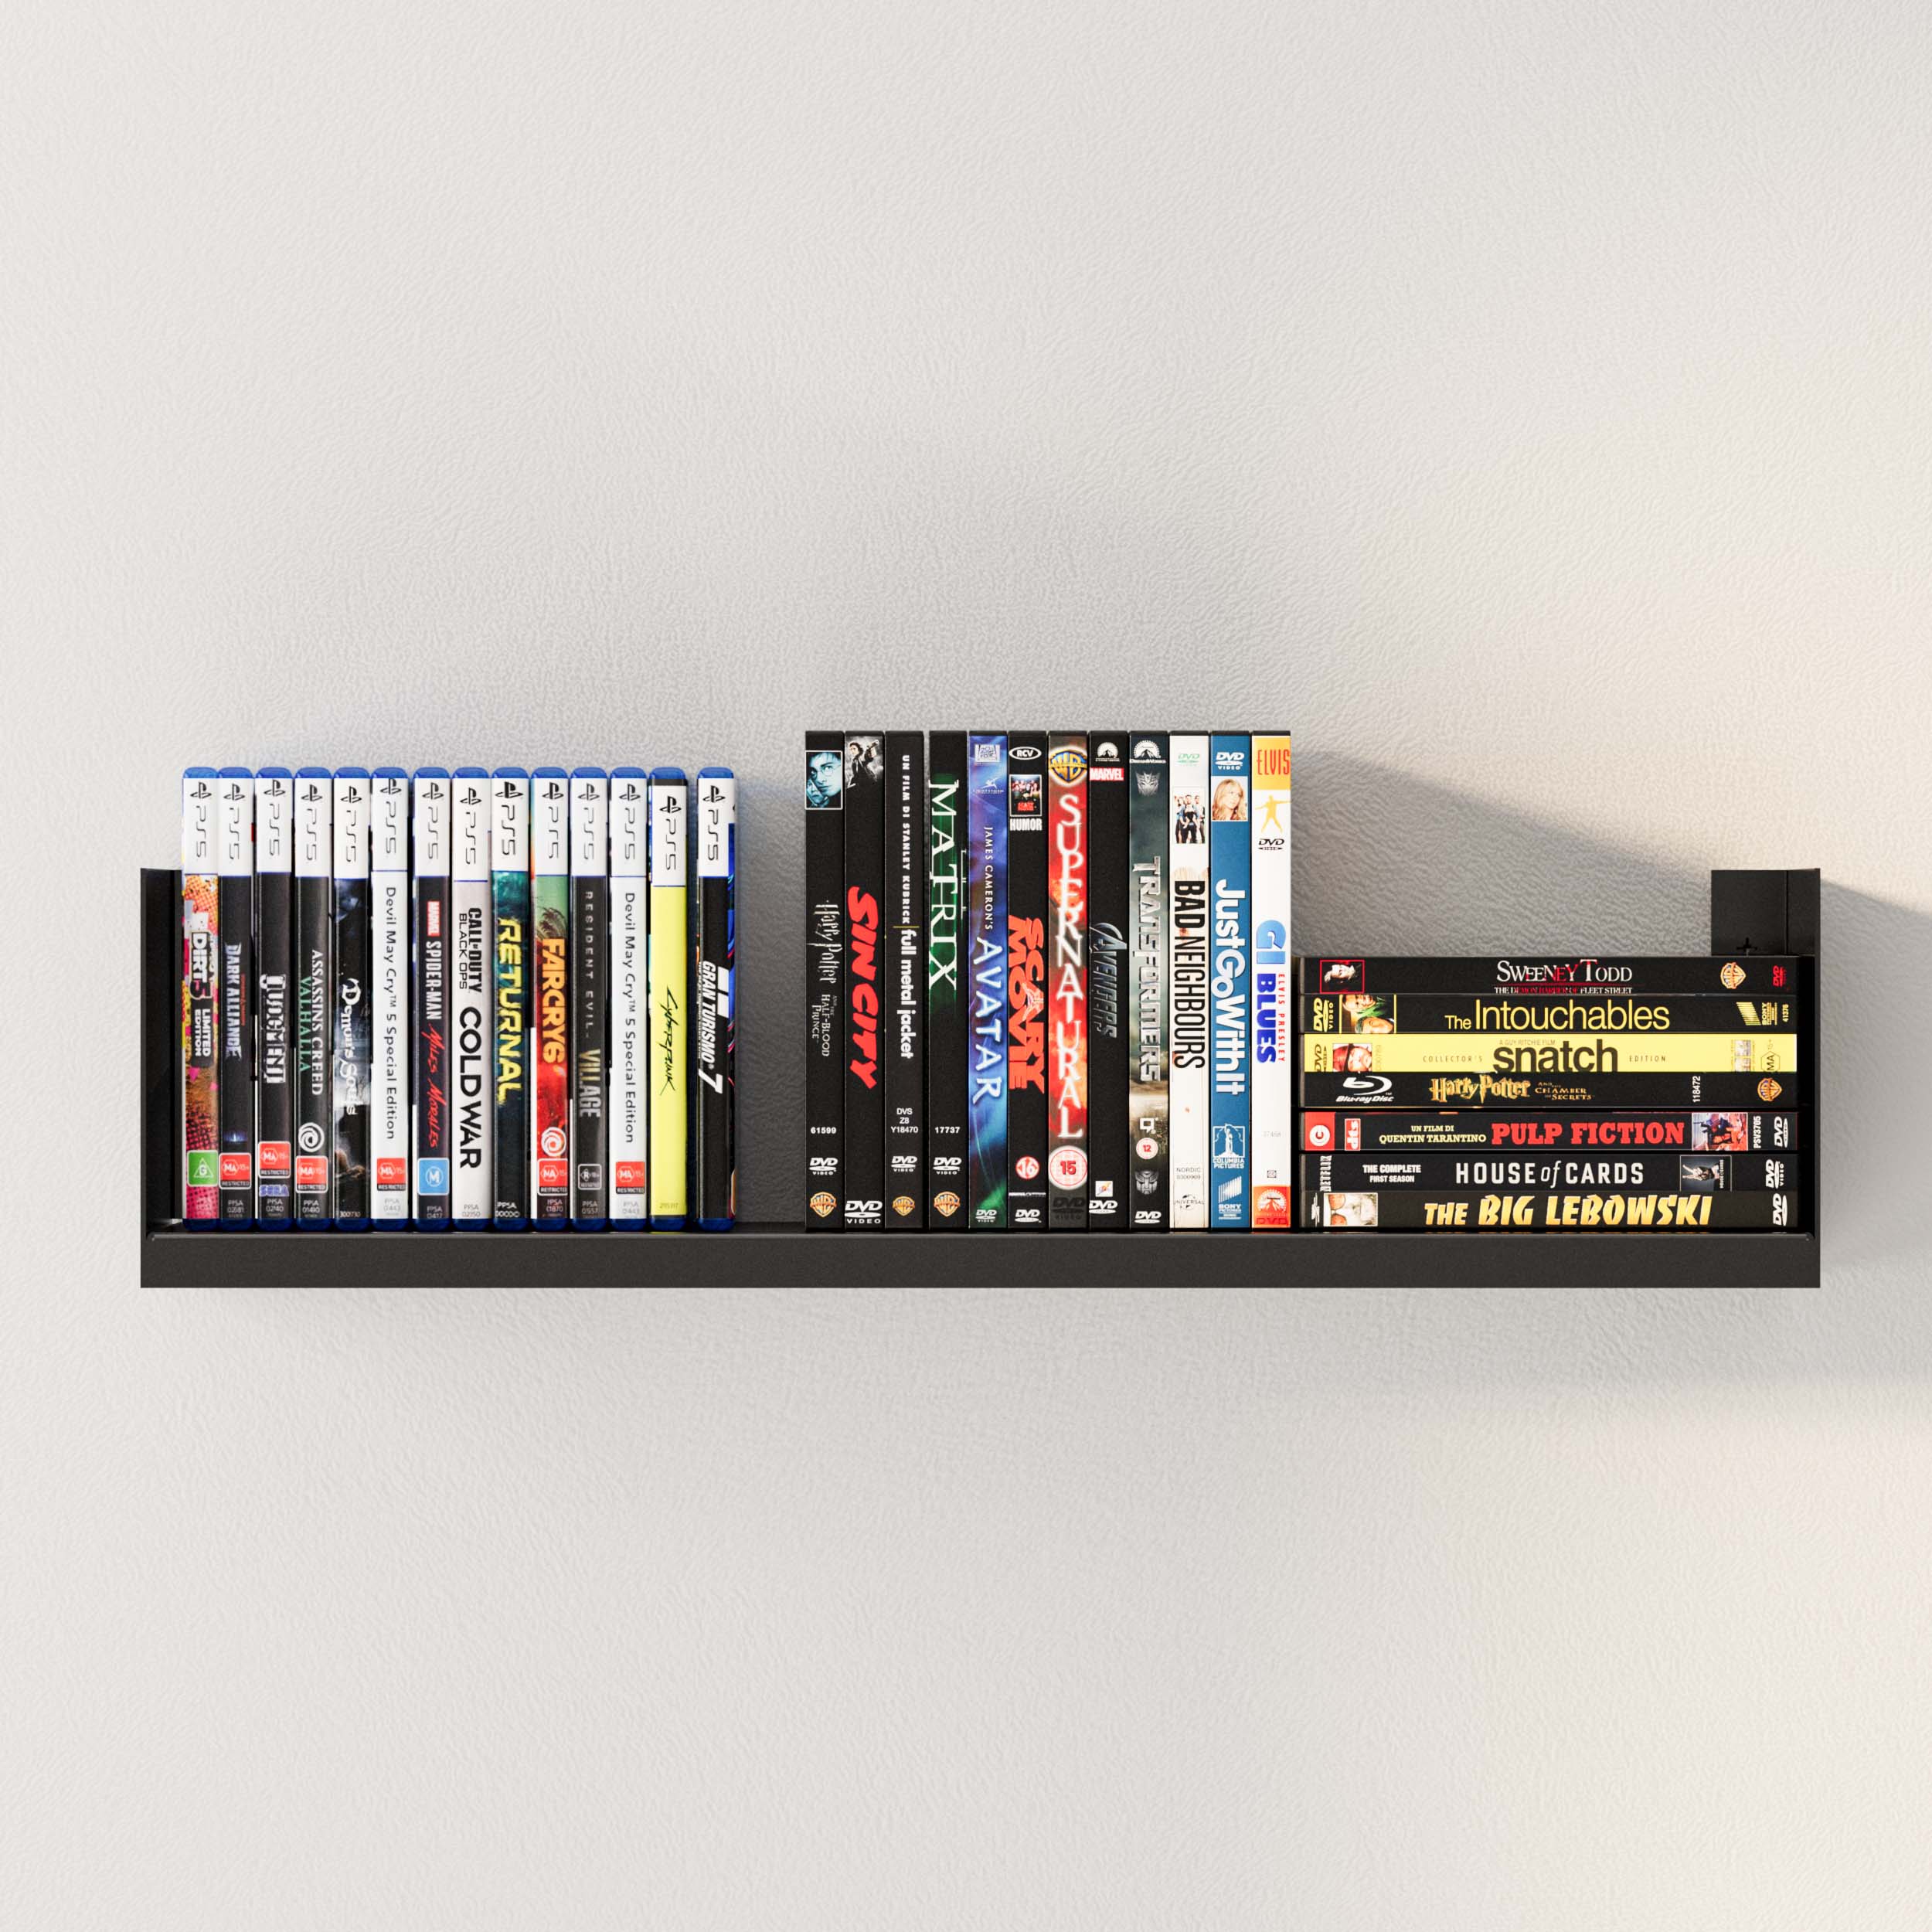 The wall-mounted floating shelf black displays DVDs and books, highlighting its functionality for organizing media or decor items efficiently.